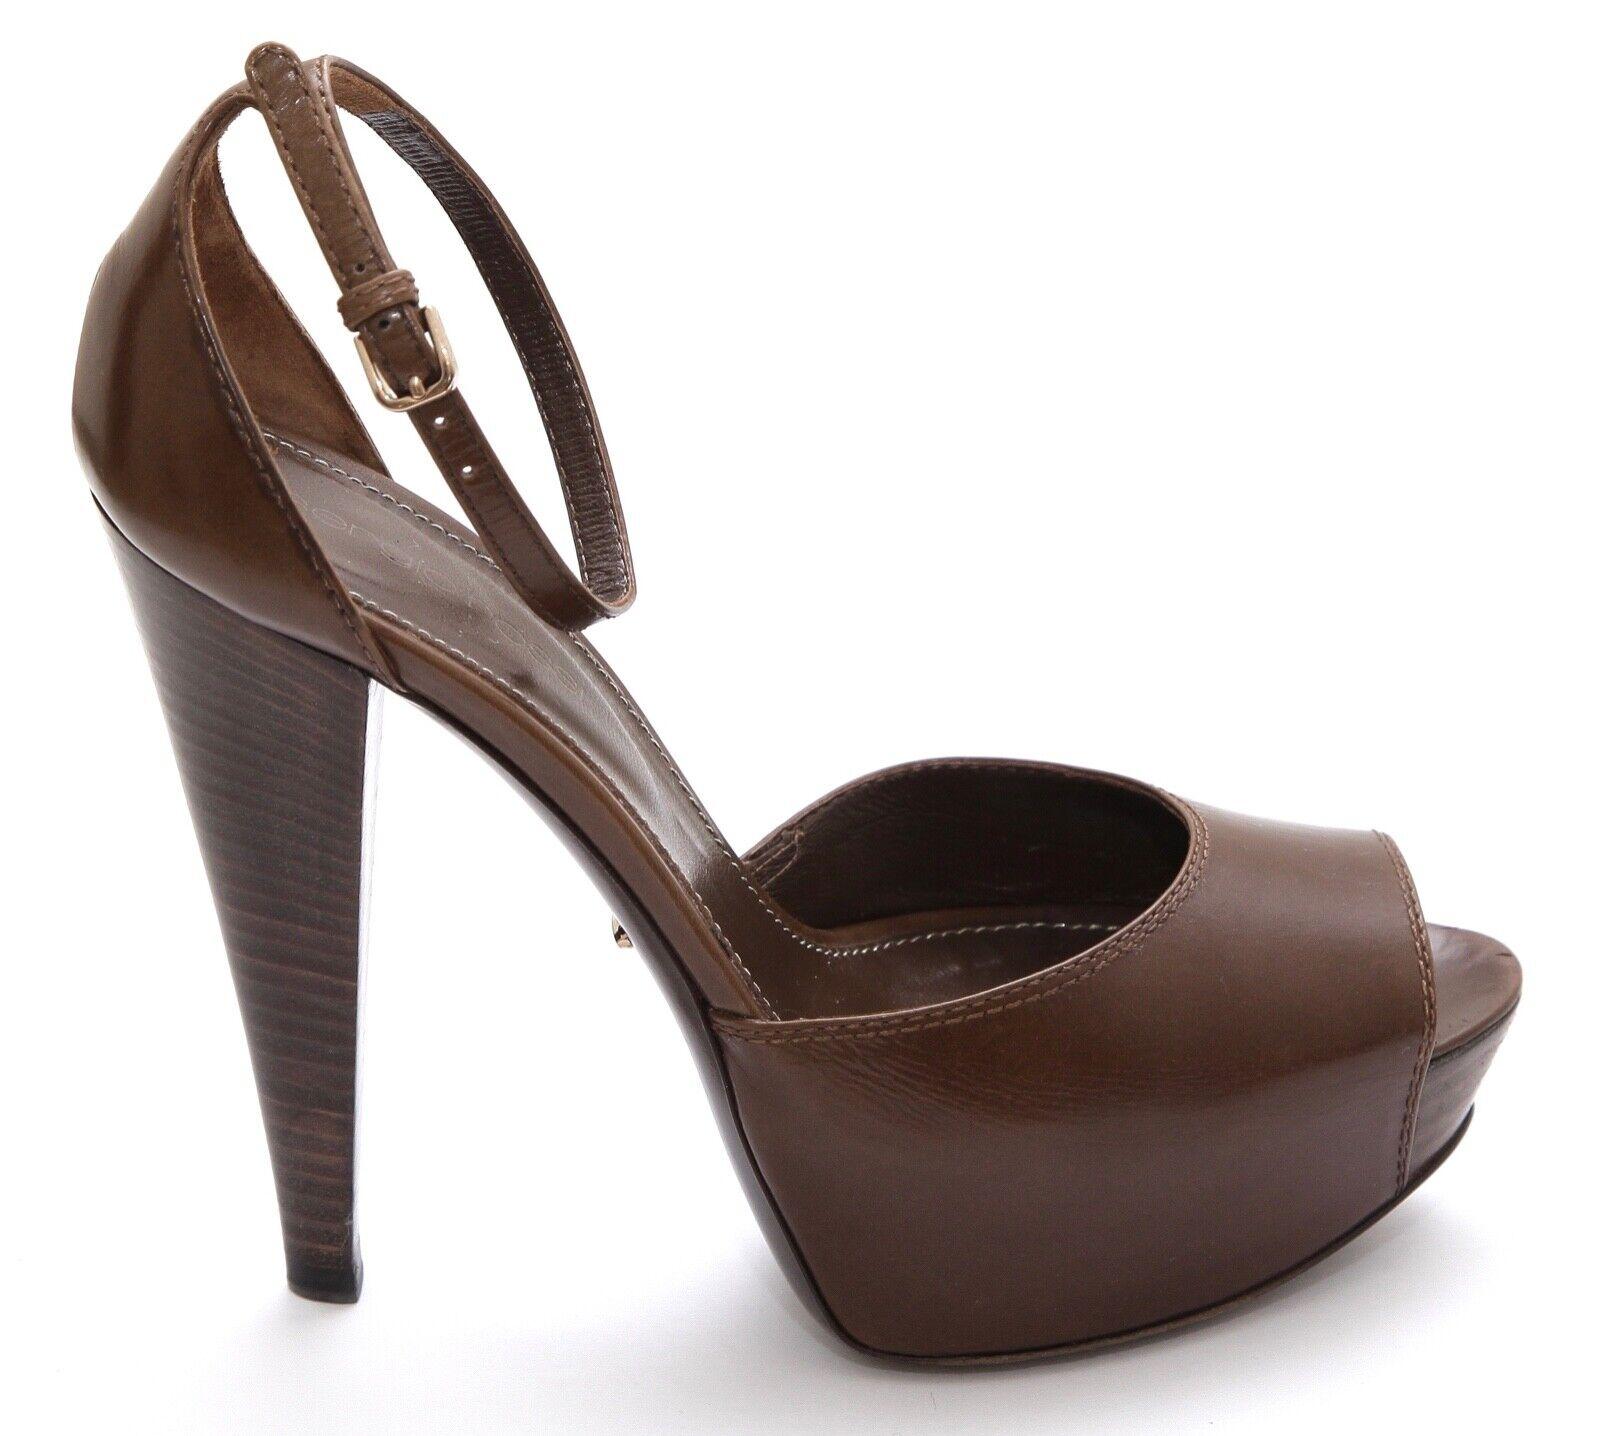 GUARANTEED AUTHENTIC SERGIO ROSSI BROWN LEATHER PEEP TOE PLATFORM PUMP

Design:
- Brown leather covered platform pump/sandal.
- Peep toe.
- Covered platform.
- Leather ankle strap.
- Leather lining and sole.
- Comes with dust bag and box.

Size: